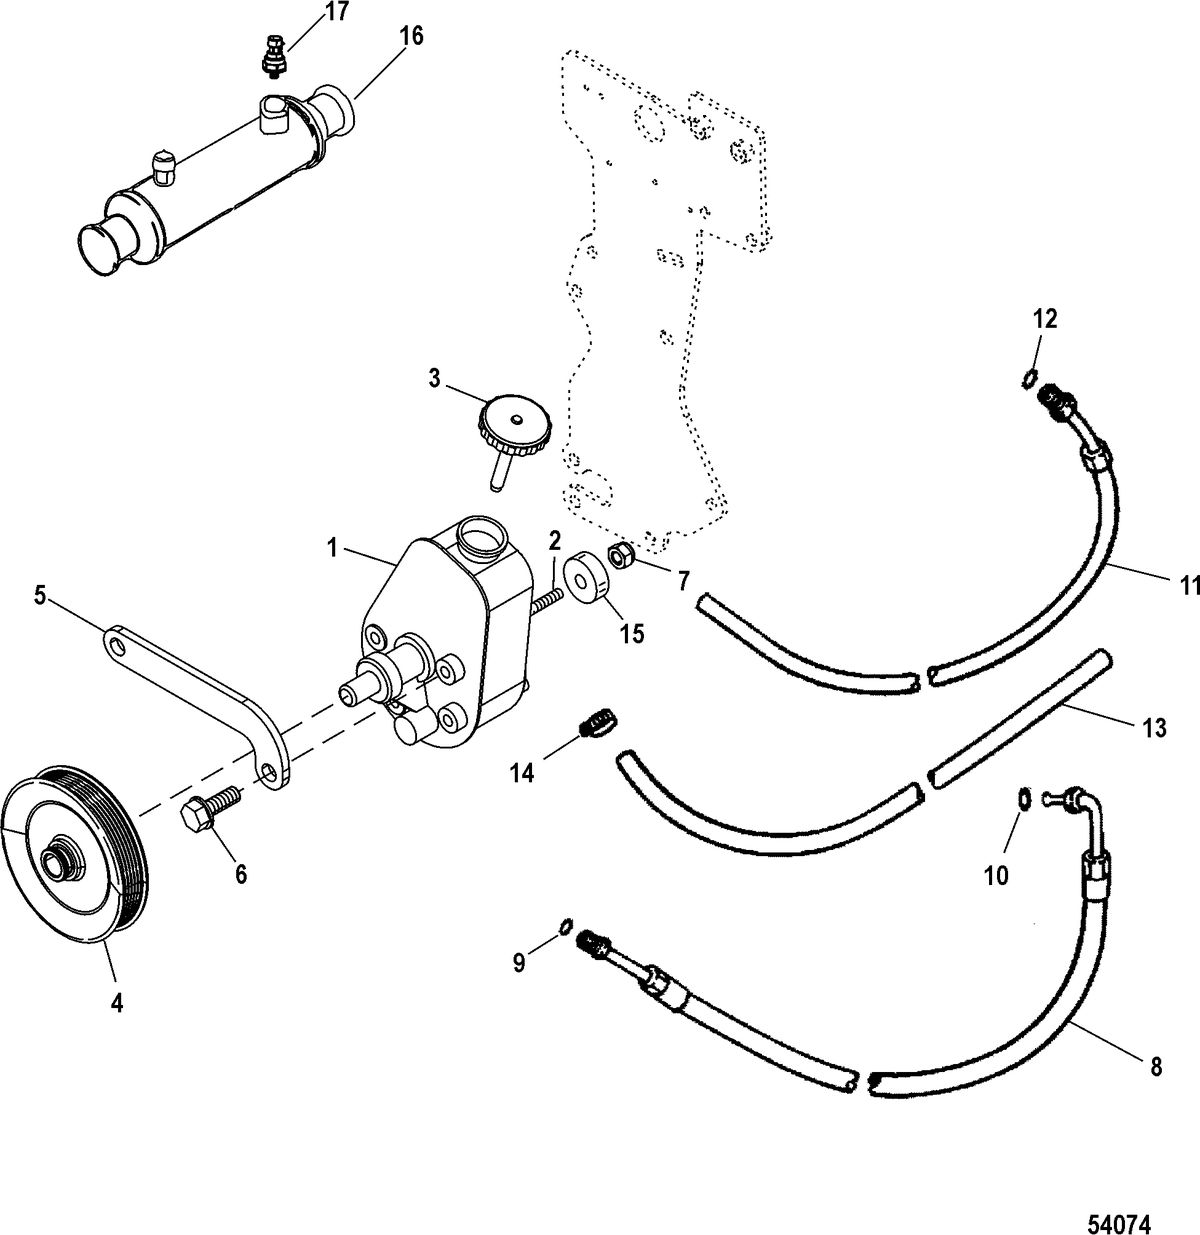 MERCRUISER 385 PERFORMANCE TUNED Power Steering Components